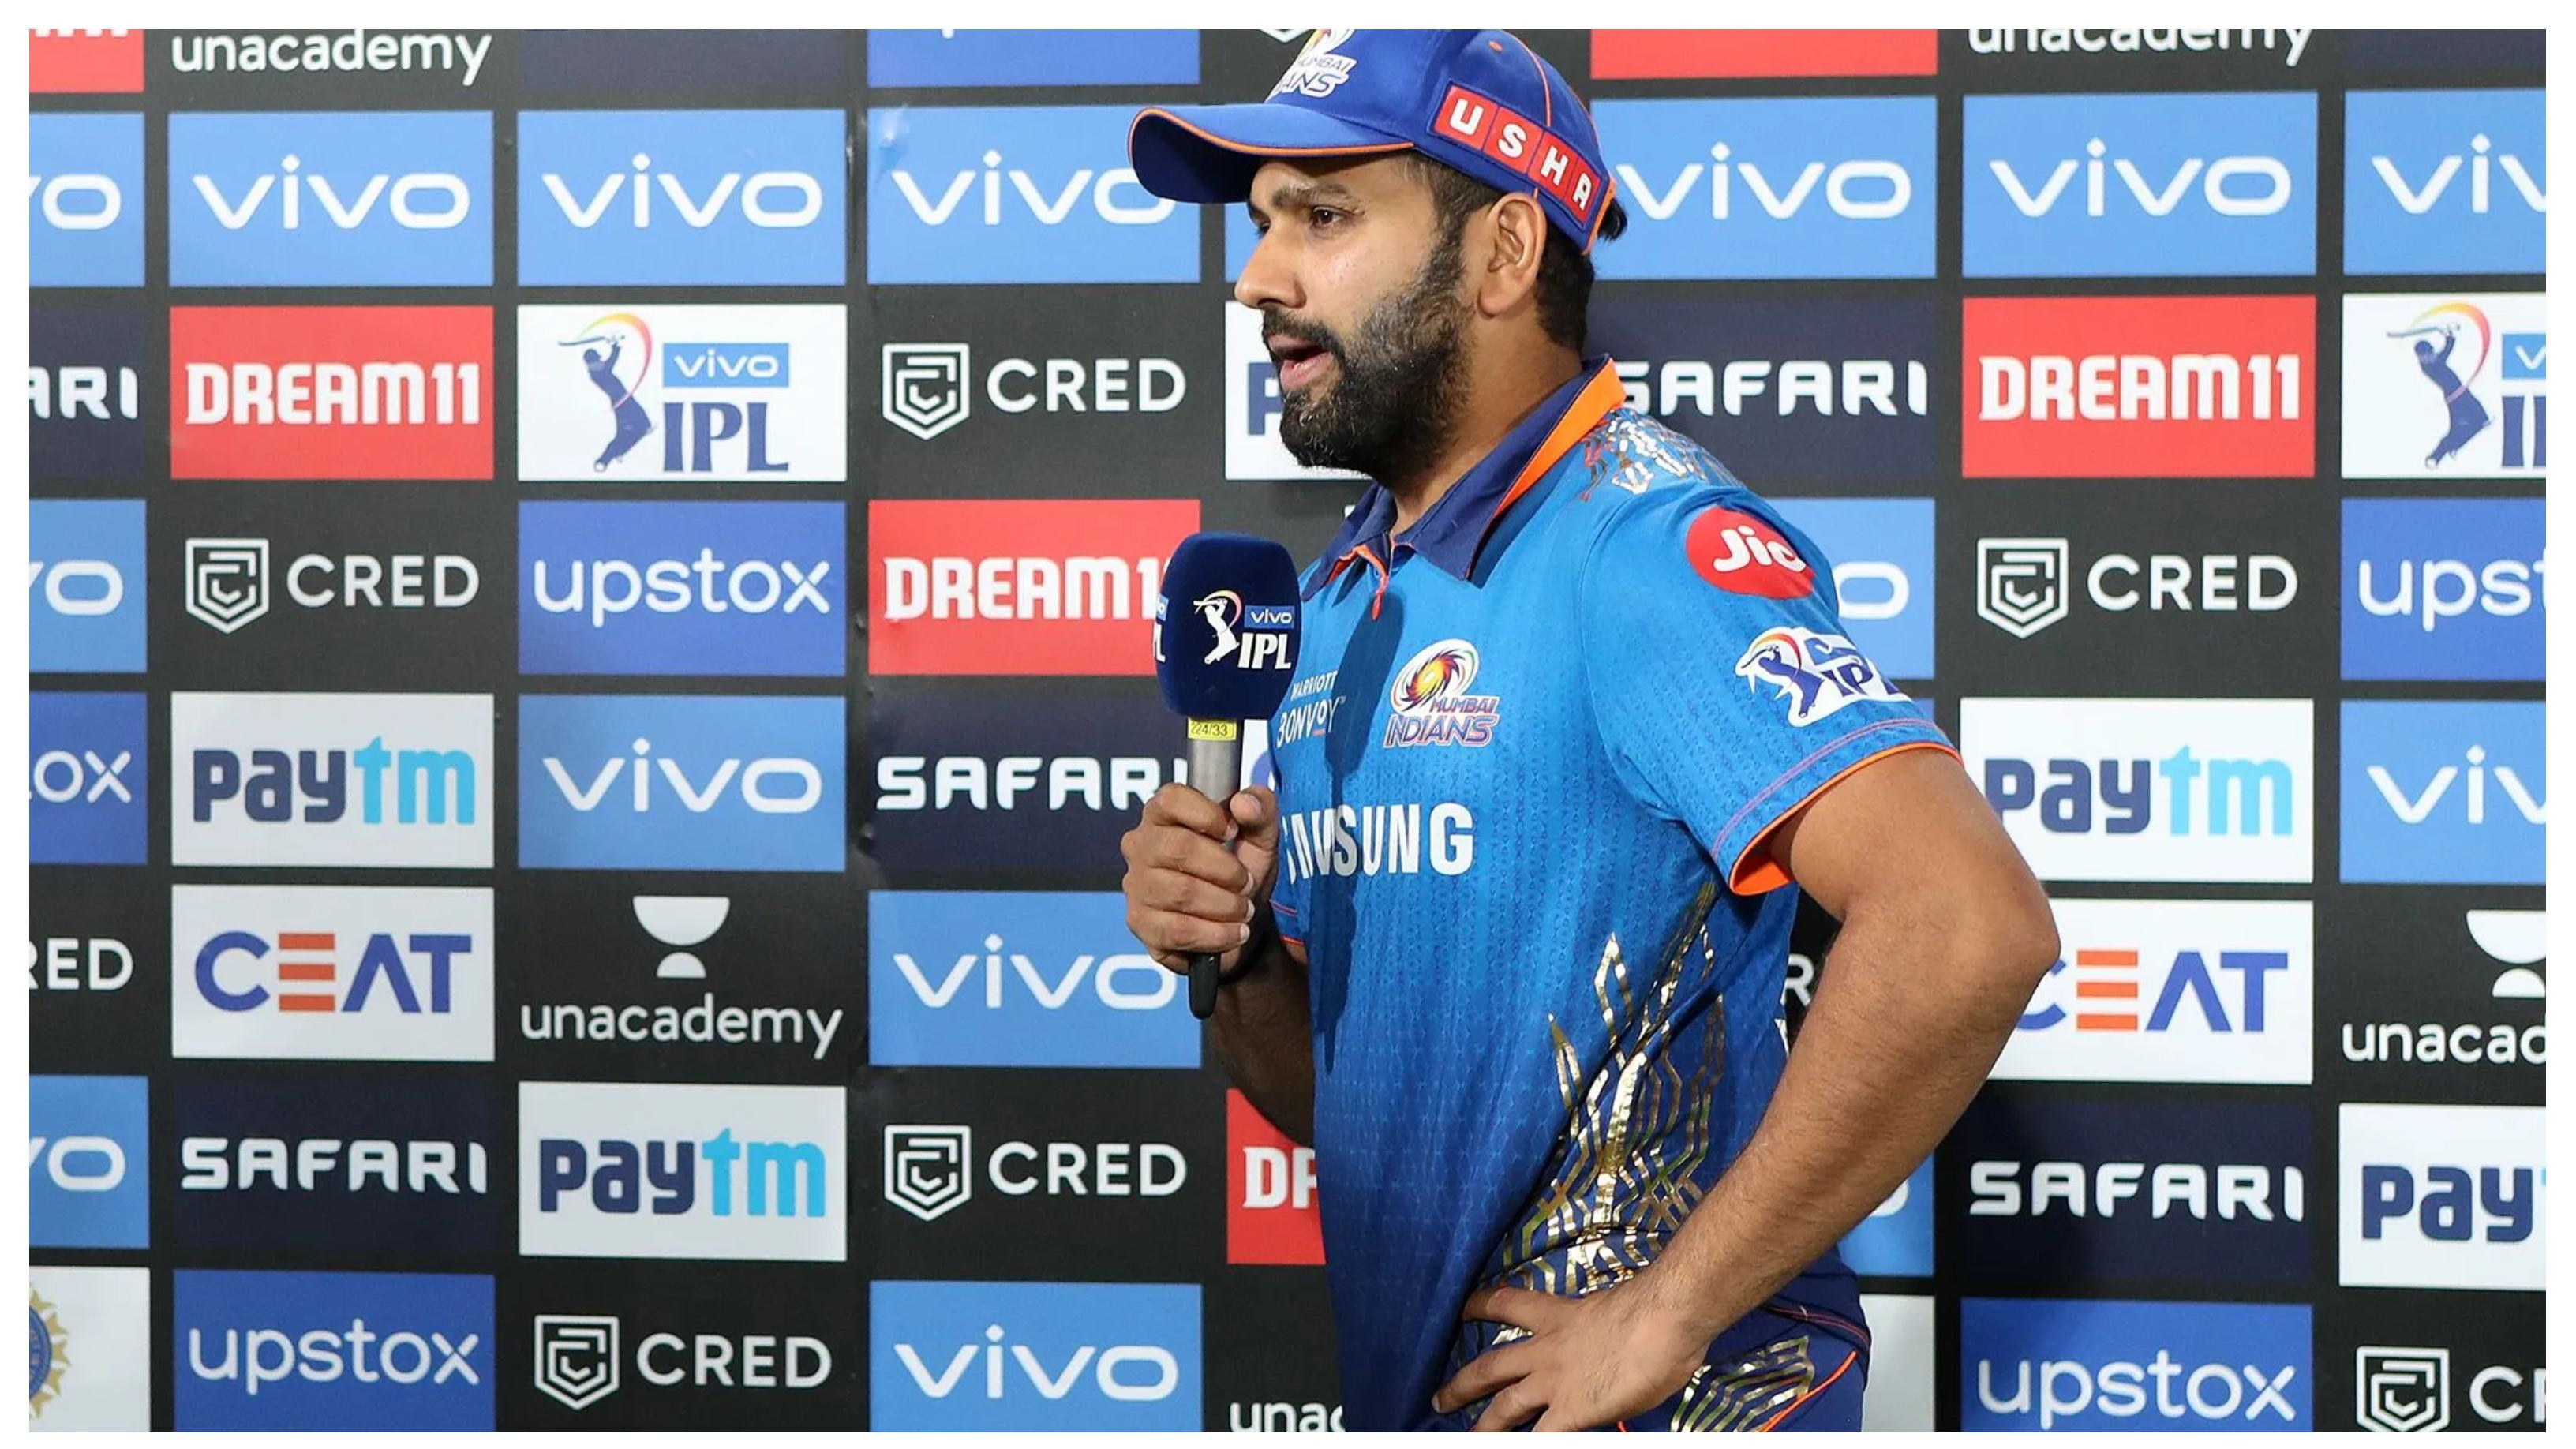 IPL 2021: ‘Guys were positive since Delhi pitch is good, unlike Chennai’, Rohit Sharma after MI’s win over RR